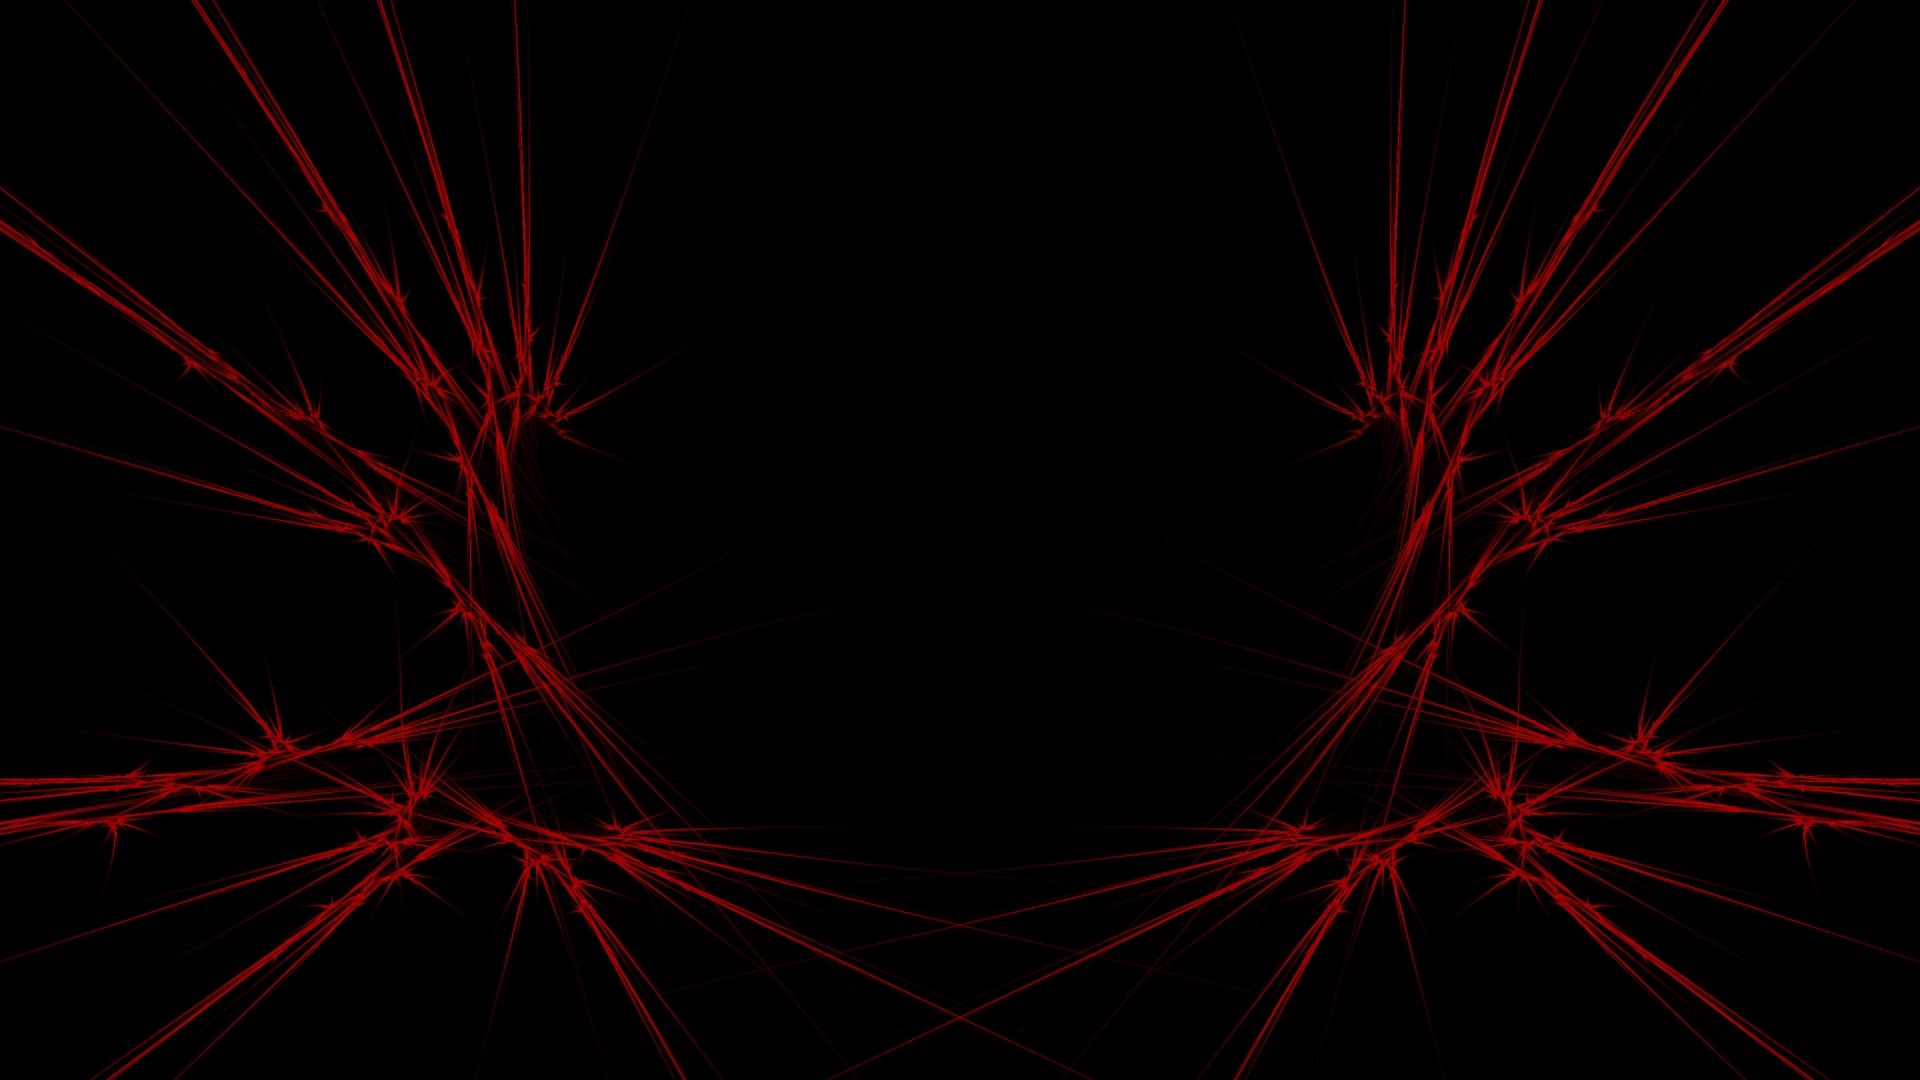 Download wallpaper 1920x1080 red, black, abstract hd background